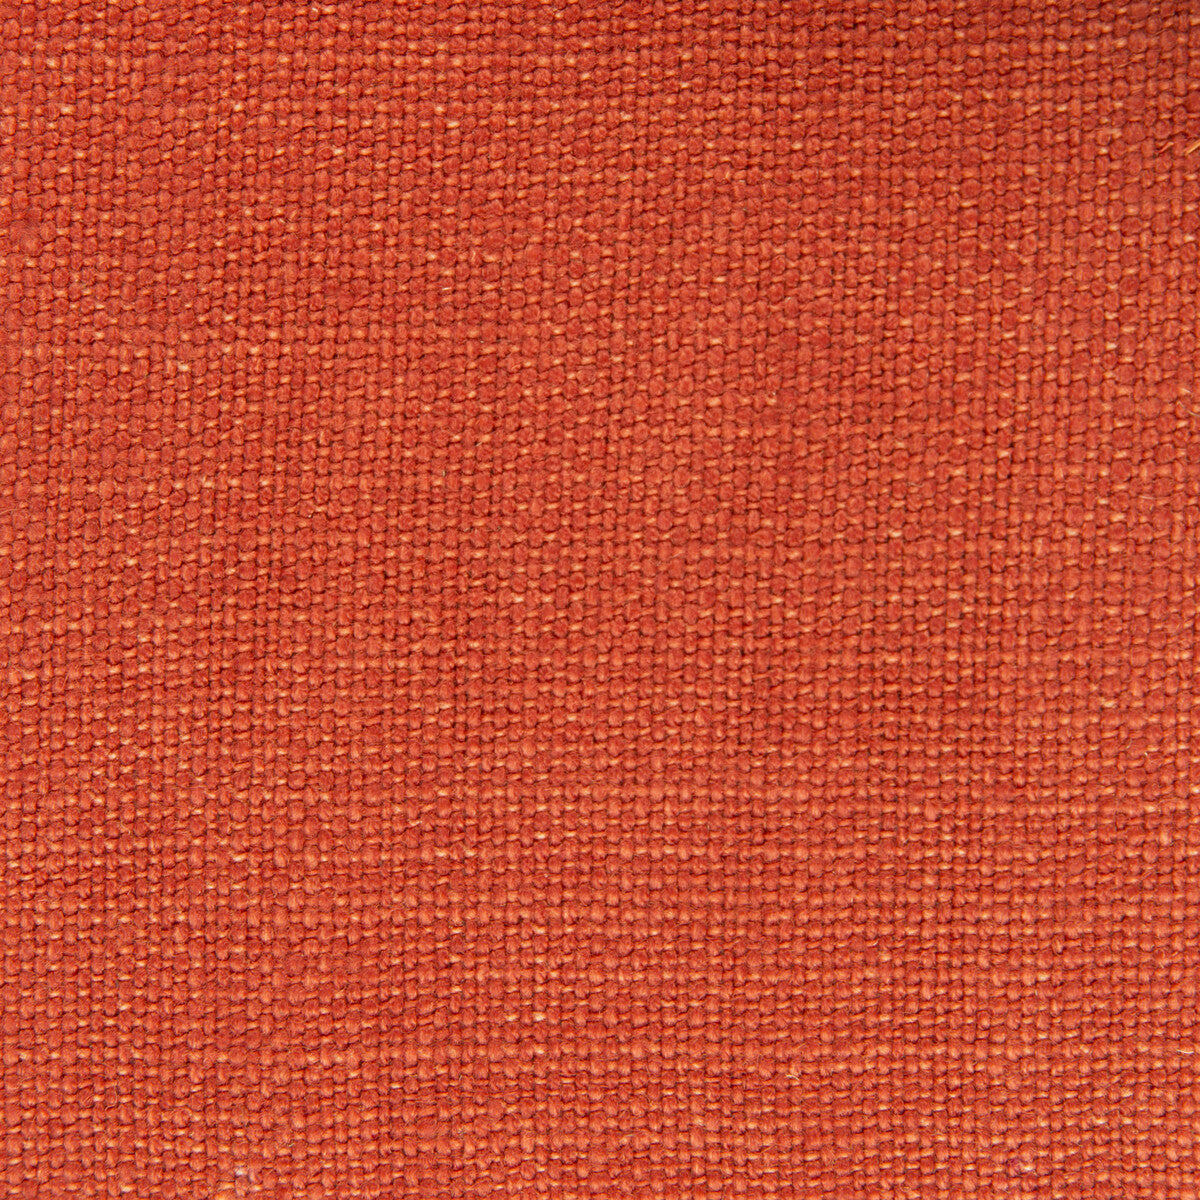 Nicaragua fabric in ladrillo color - pattern GDT5239.008.0 - by Gaston y Daniela in the Basics collection